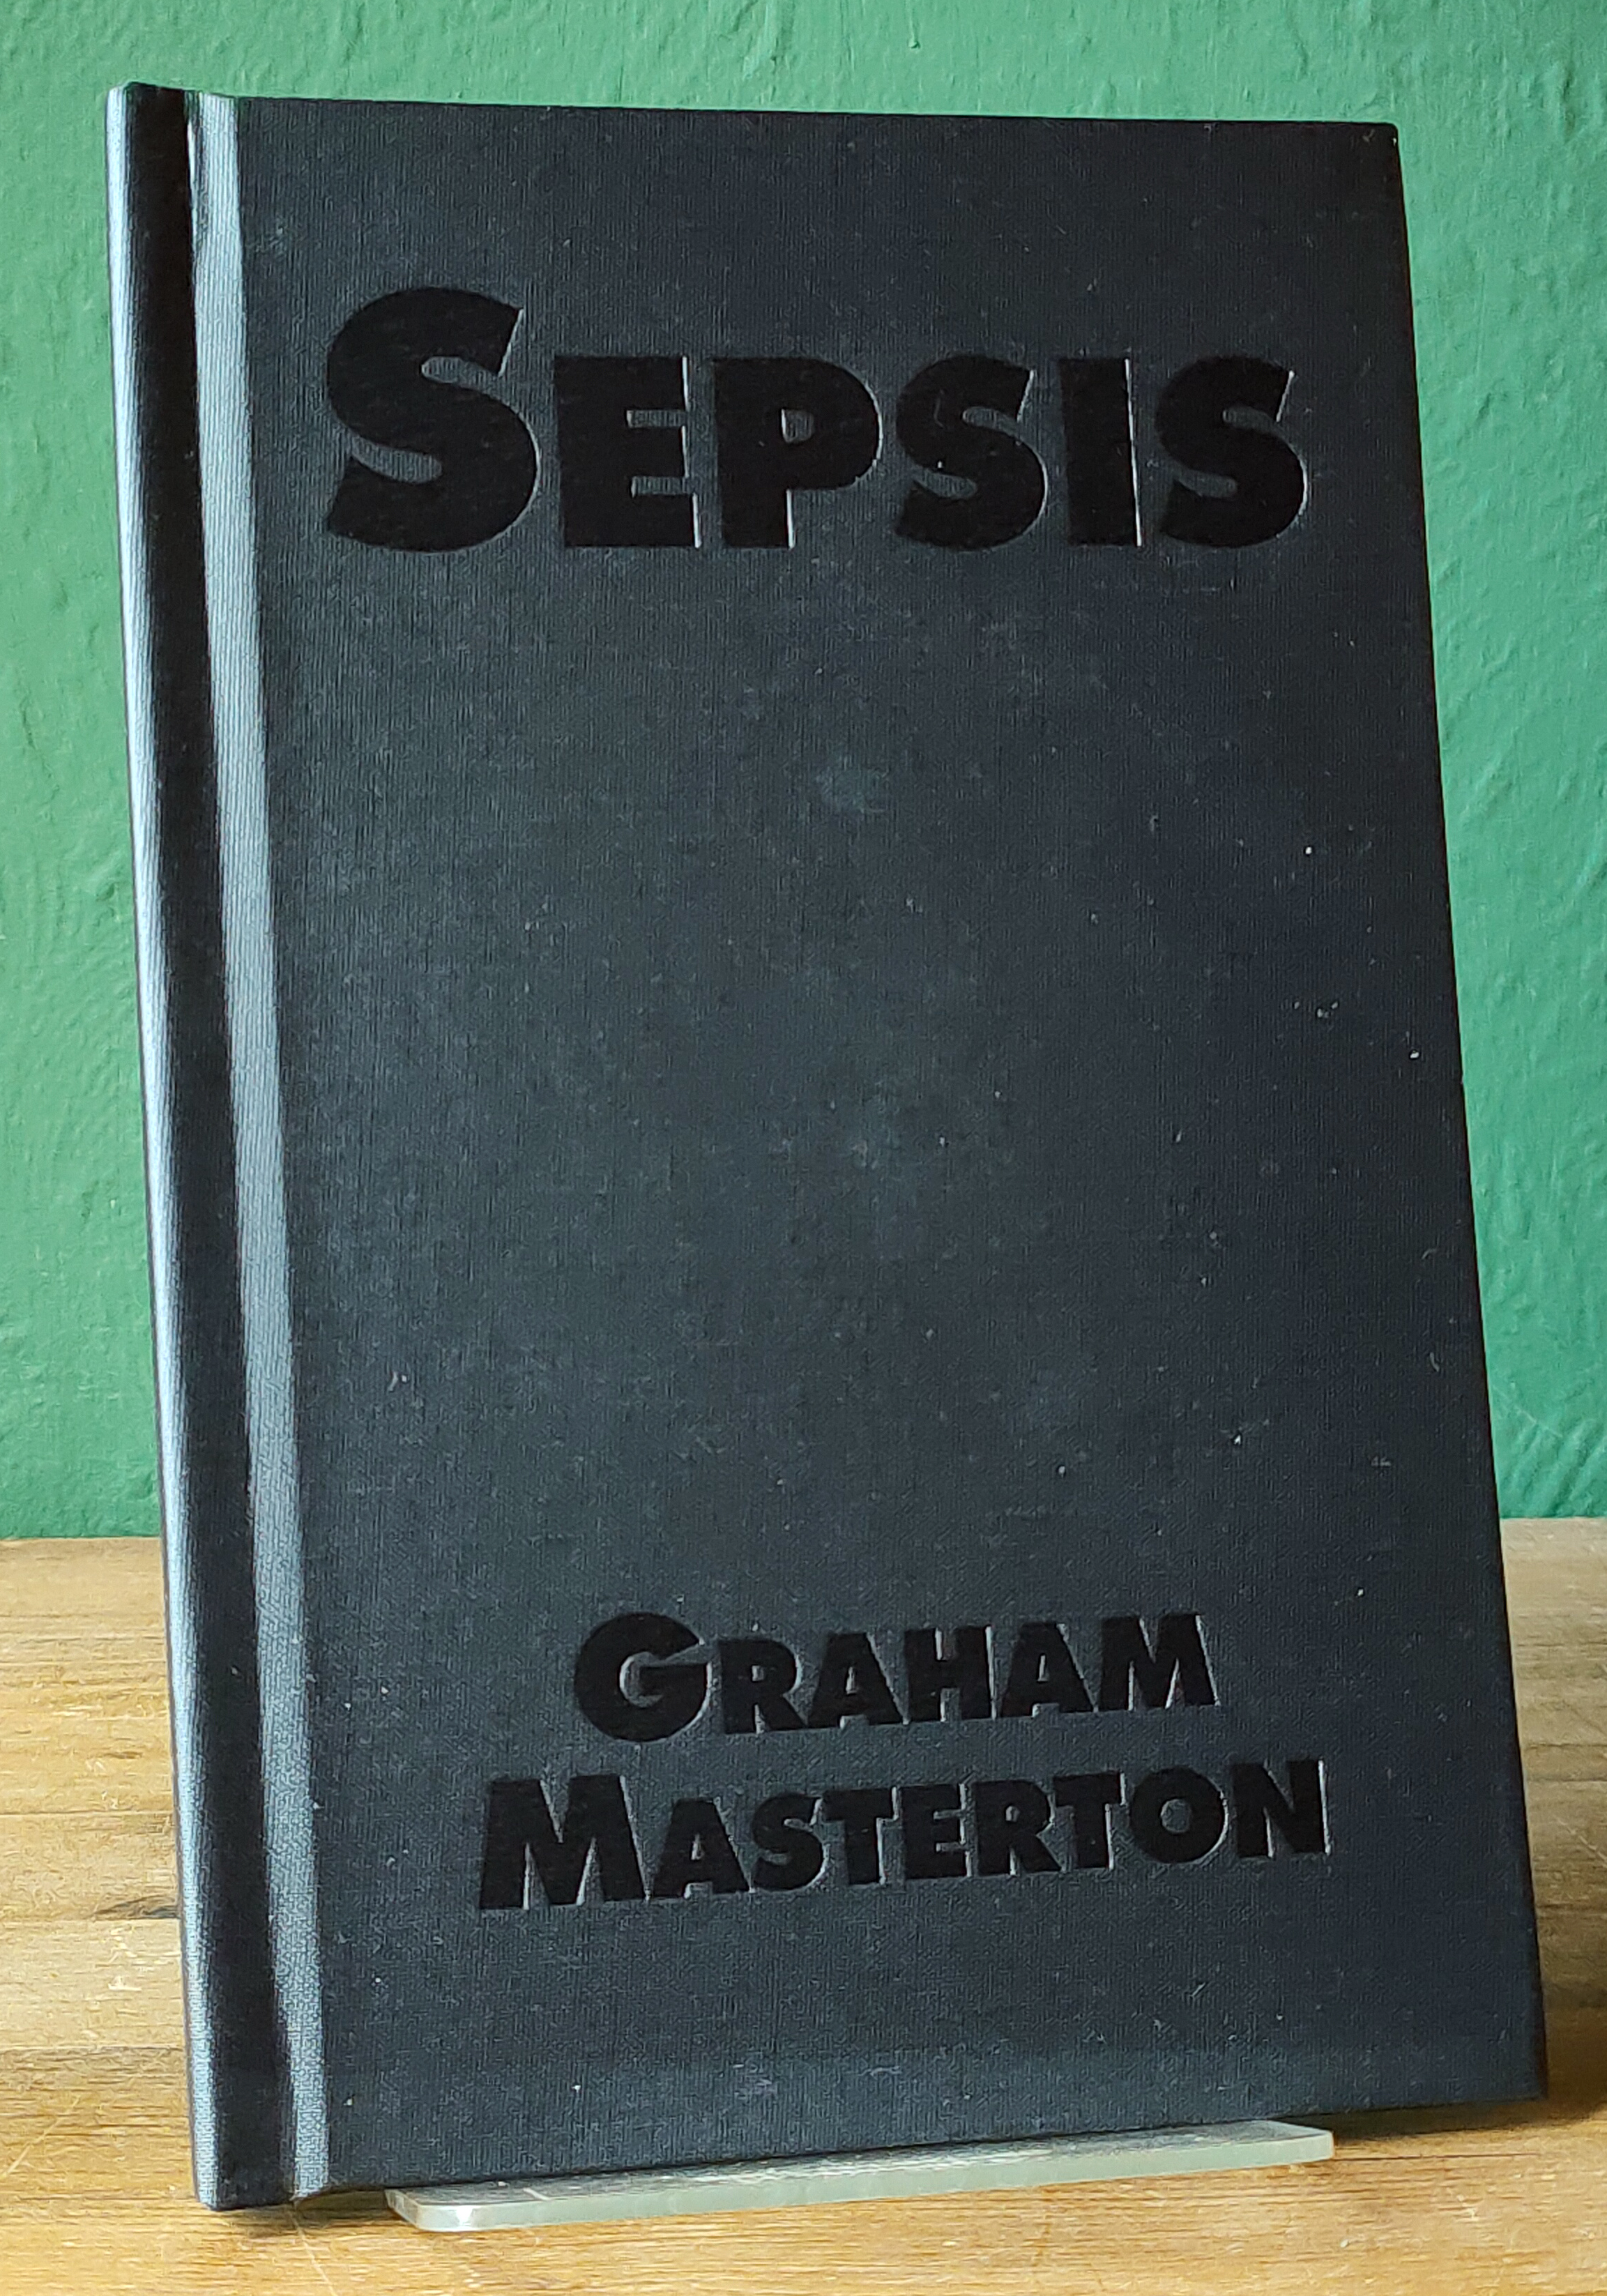 Sepsis HB Limited Edition